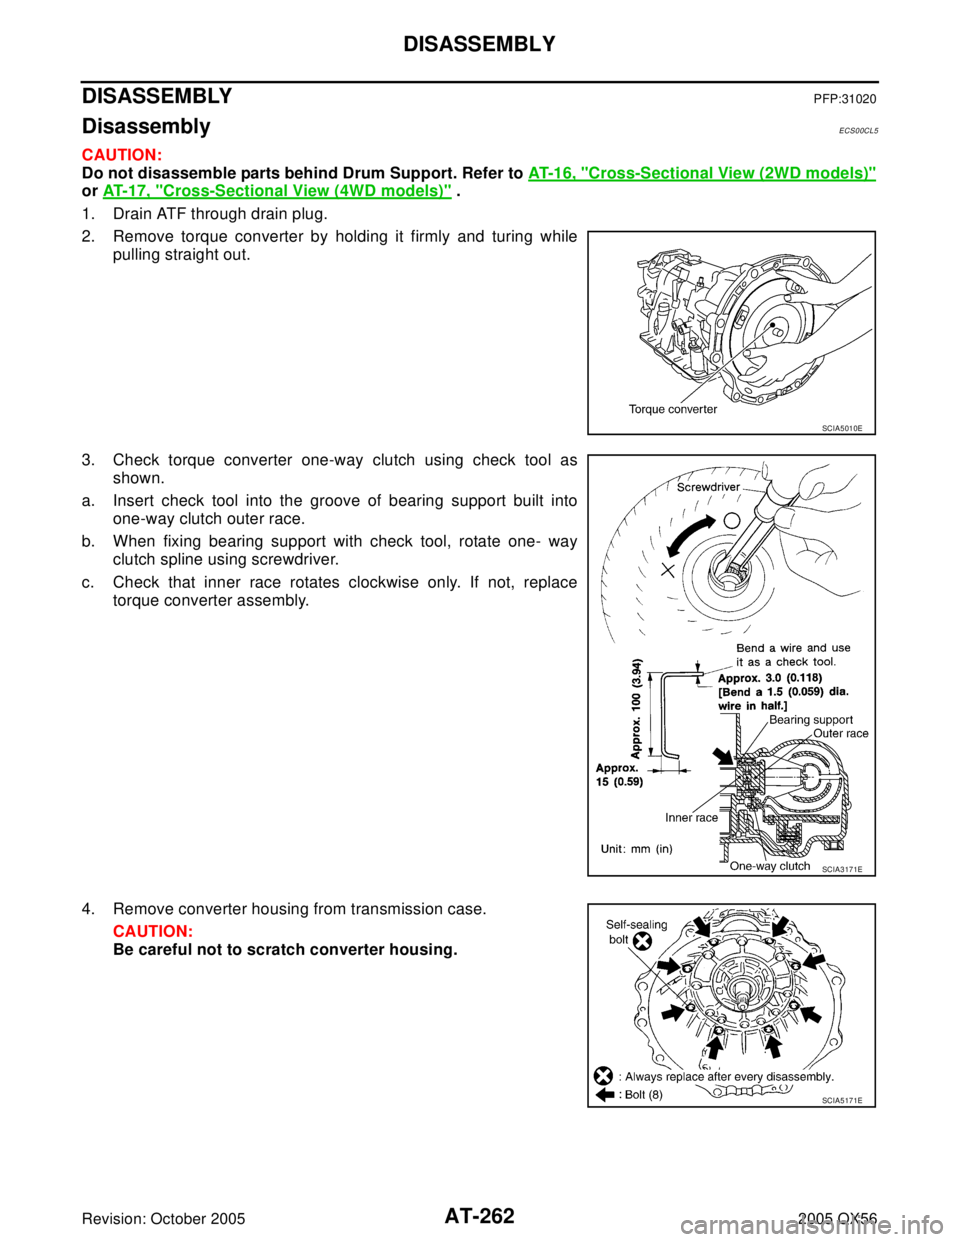 INFINITI QX4 2005  Factory Service Manual AT-262
DISASSEMBLY
Revision: October 20052005 QX56
DISASSEMBLYPFP:31020
DisassemblyECS00CL5
CAUTION:
Do not disassemble parts behind Drum Support. Refer to AT-1 6, "
Cross-Sectional View (2WD models)"